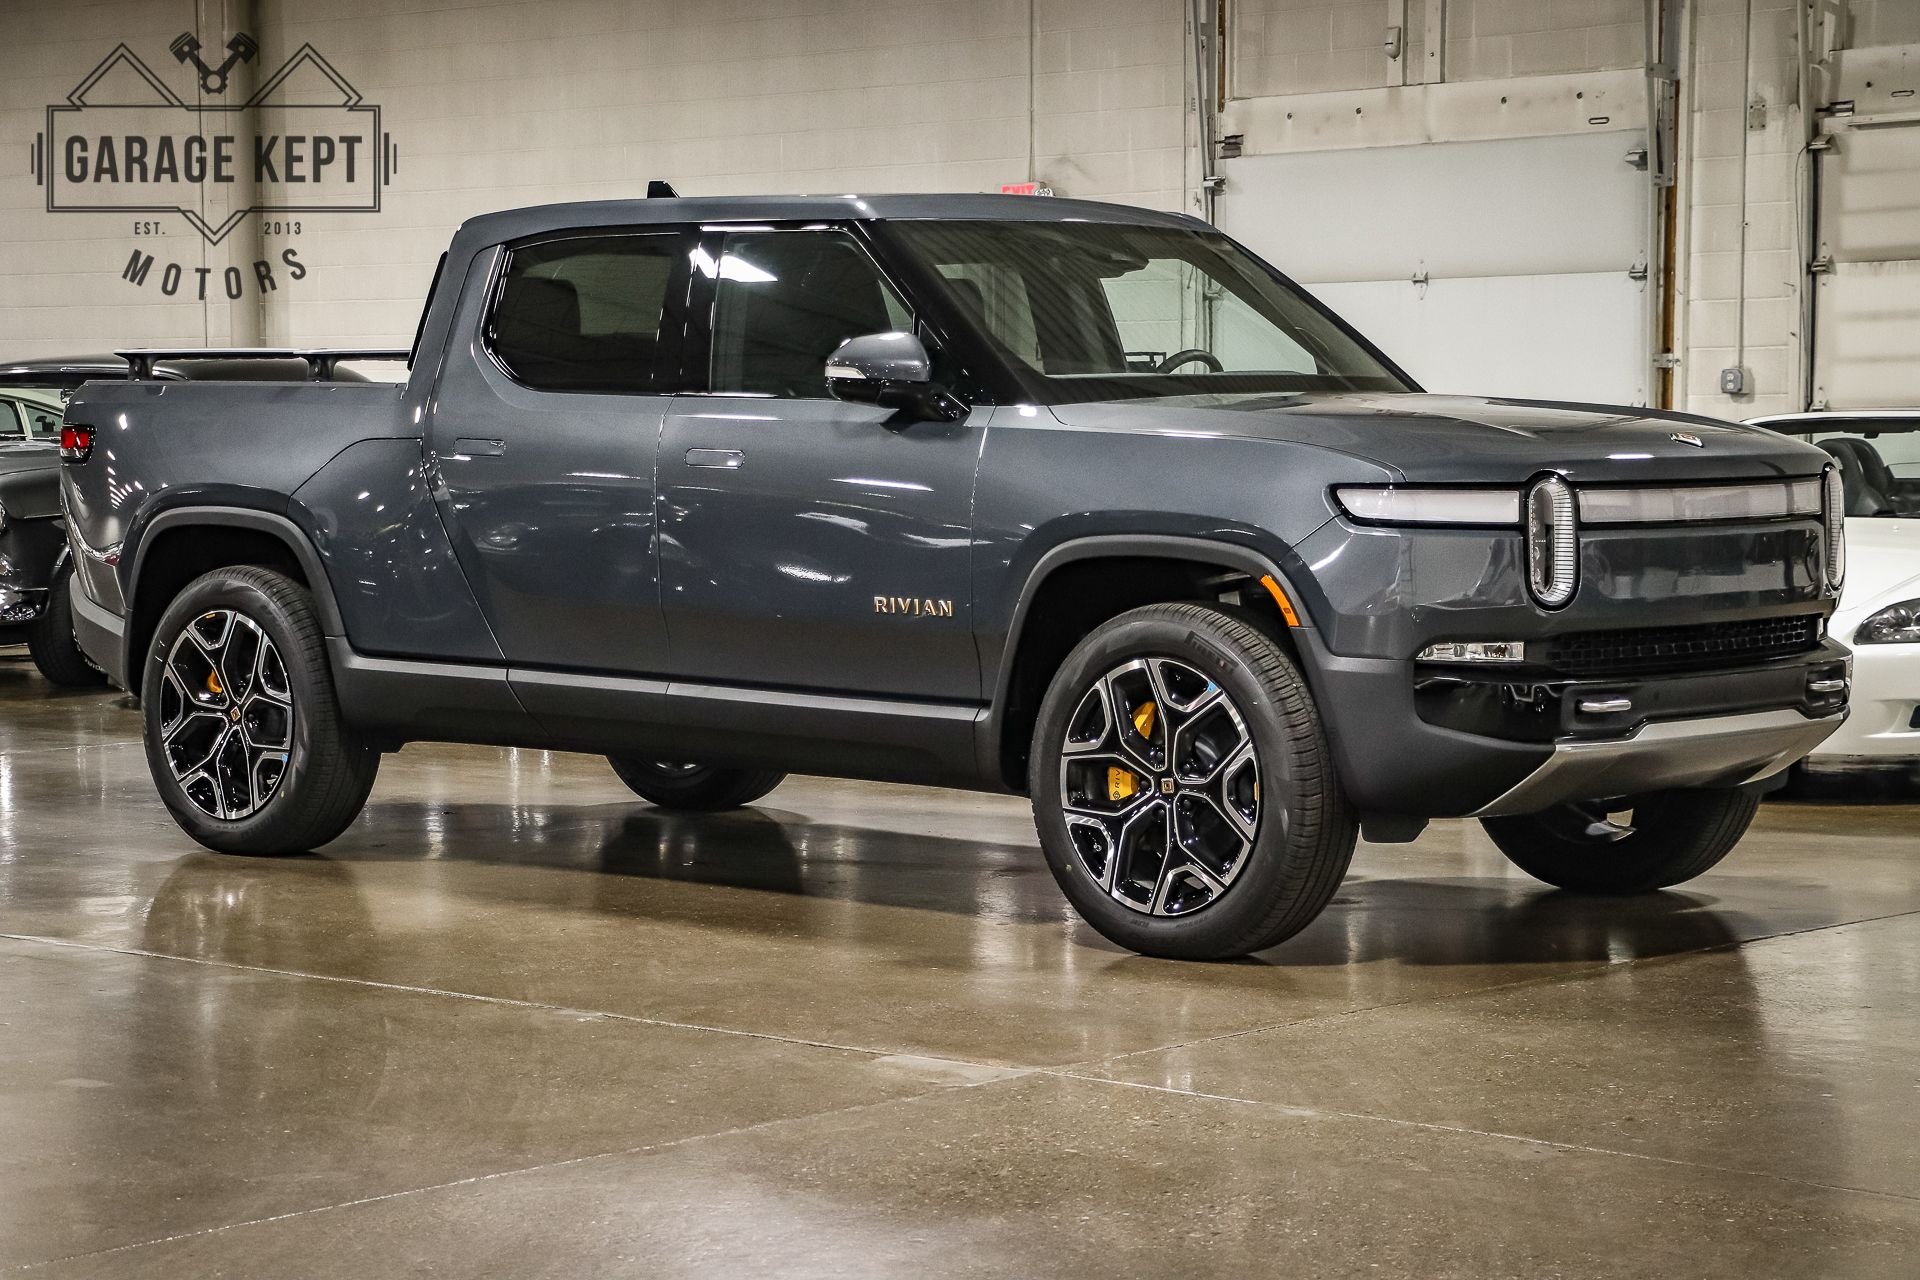 479Mile Rivian R1T Launch Edition Gets the Early Adopter Blood Flowing